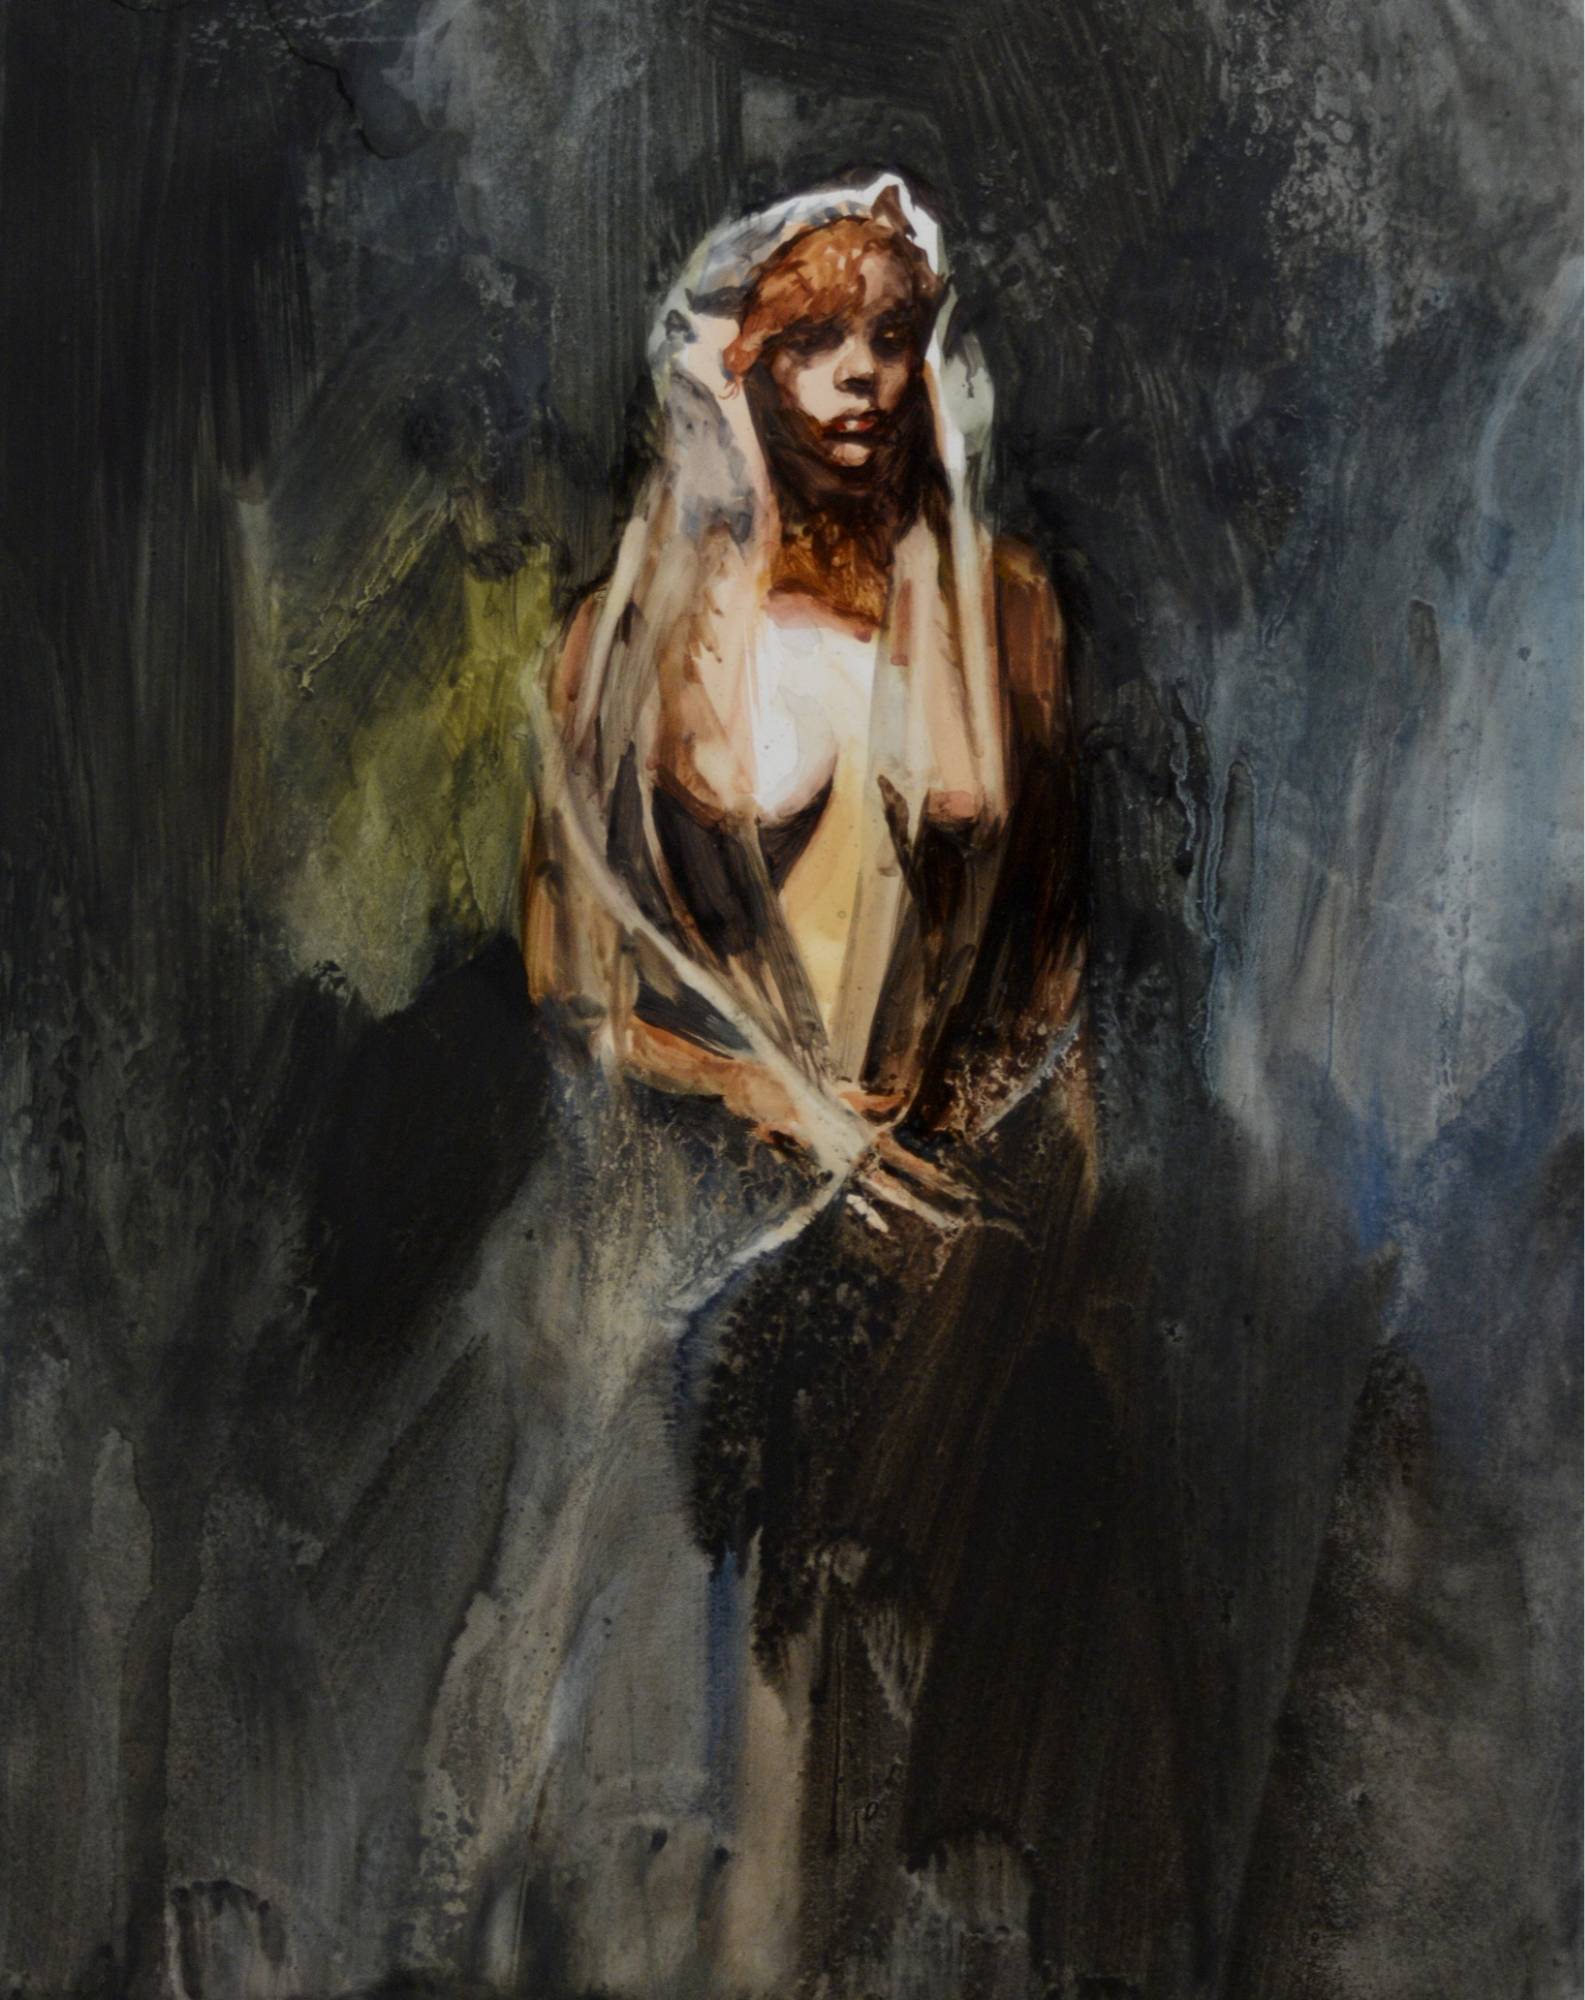 watercolor painting of a figure model draped in a gossamer fabric against a dark background.